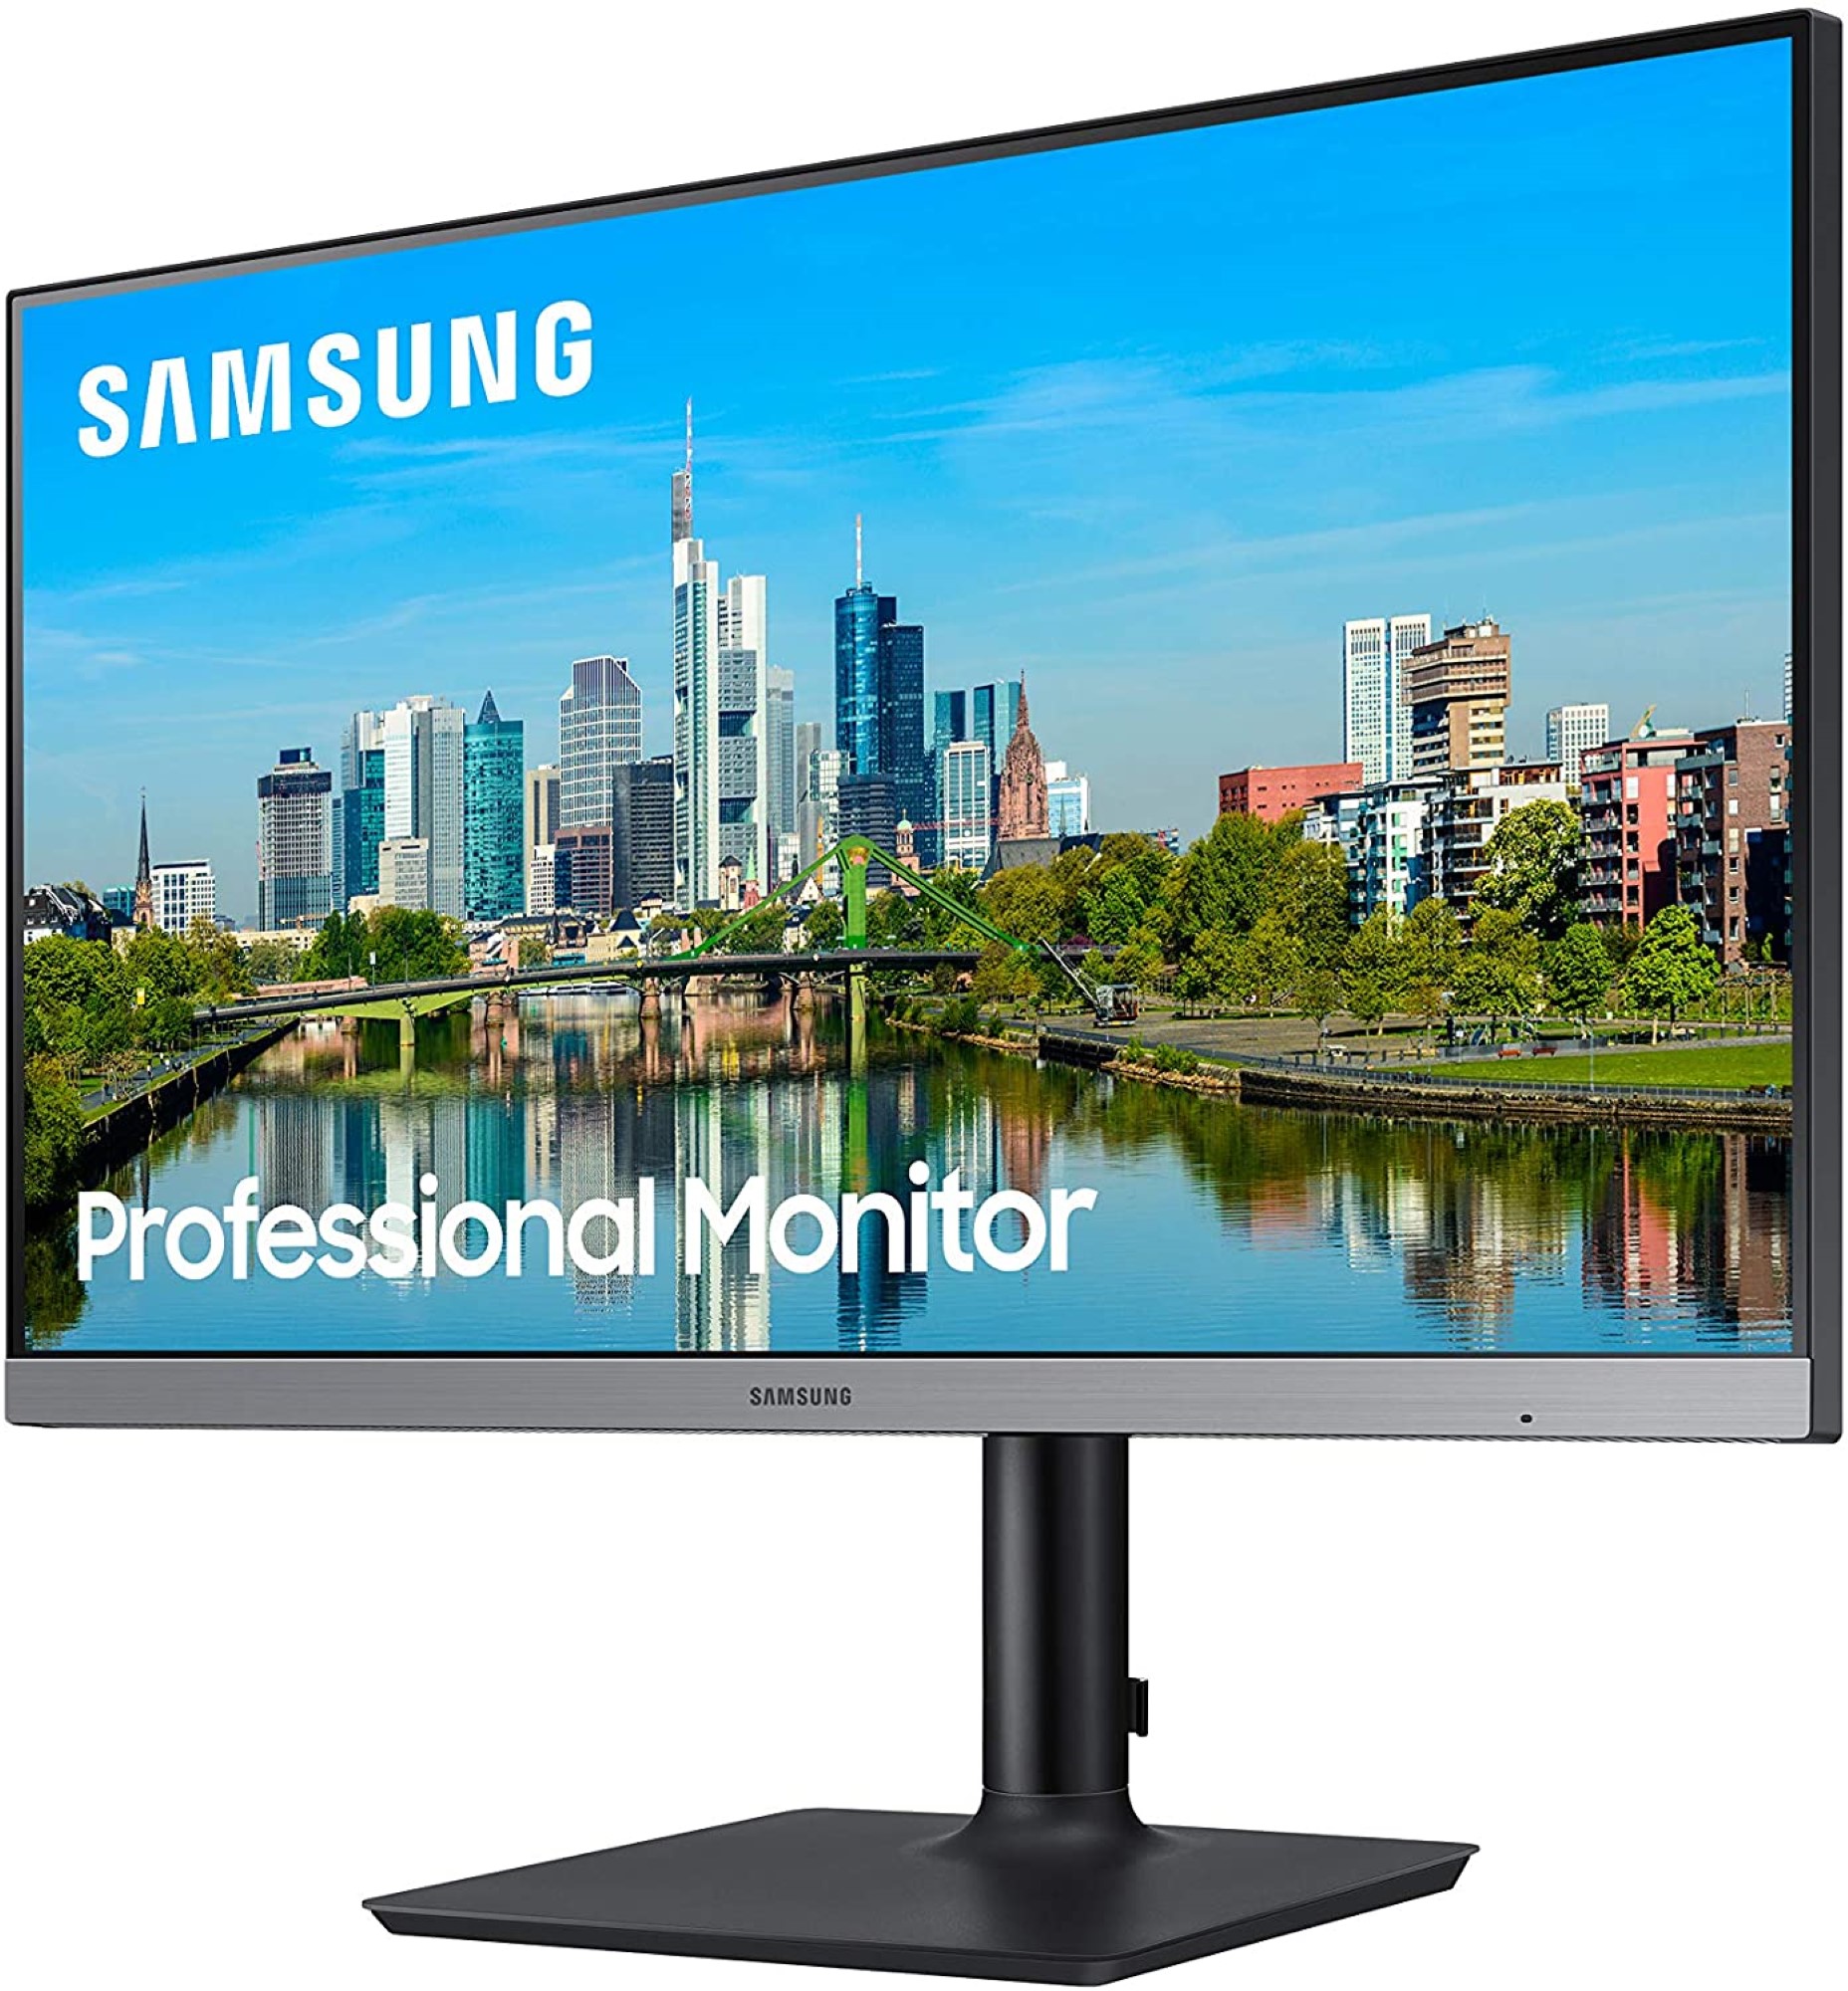 Samsung F24T650FYN Business FT650 24 inch 1080p 75Hz IPS Computer Monitor for Business with HDMI, DVI, DisplayPort, USB, HAS Stand - image 1 of 4